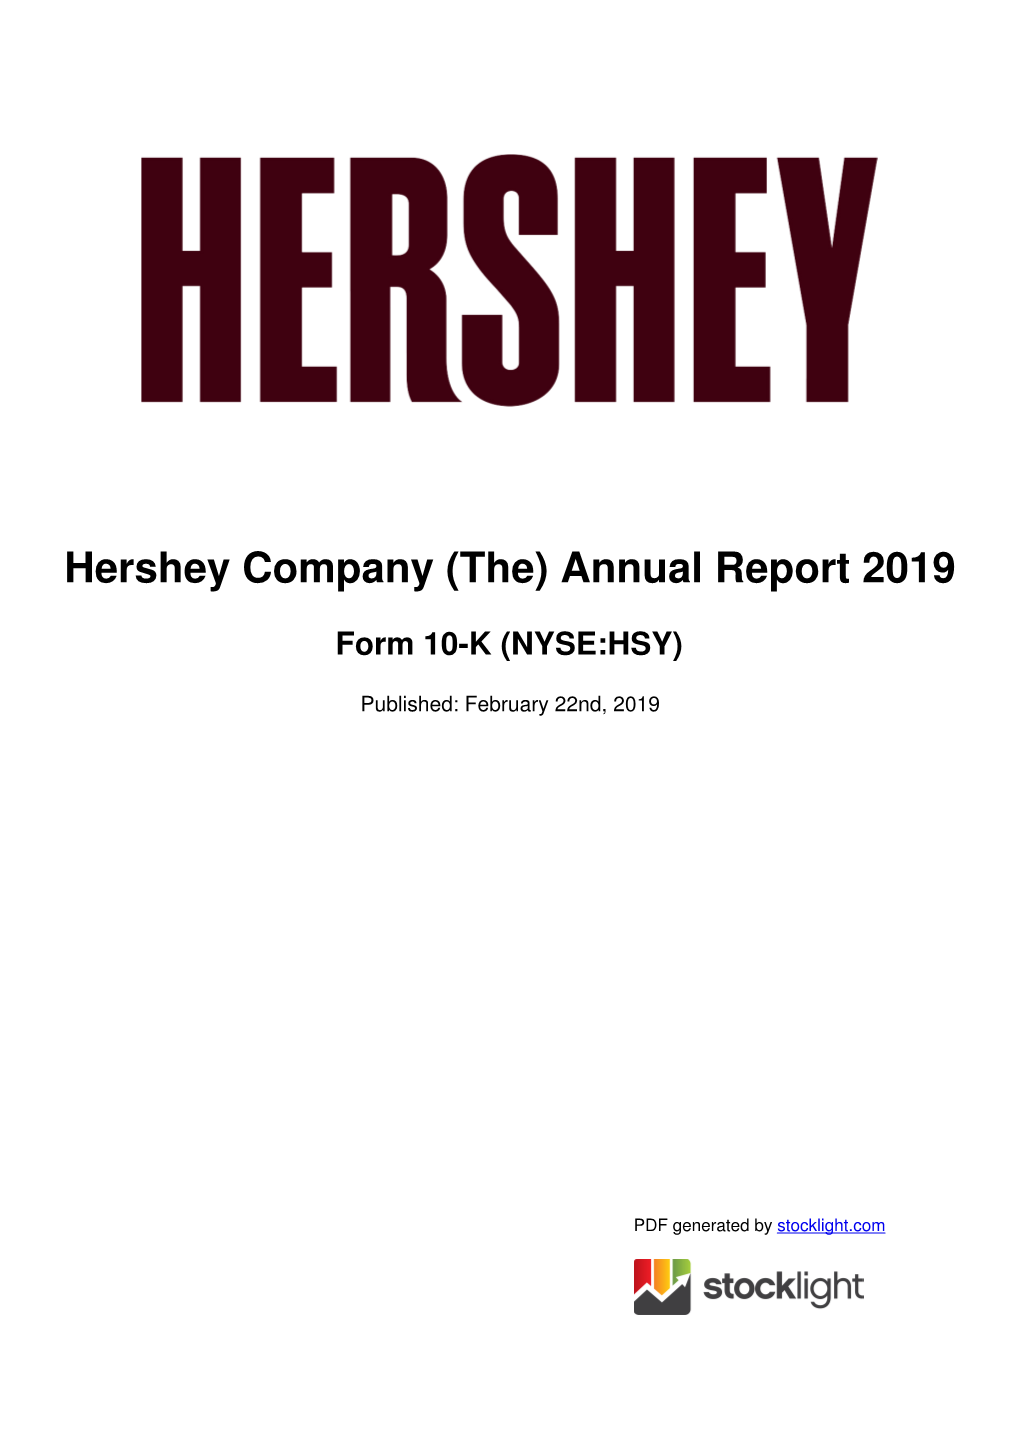 Hershey Company (The) Annual Report 2019